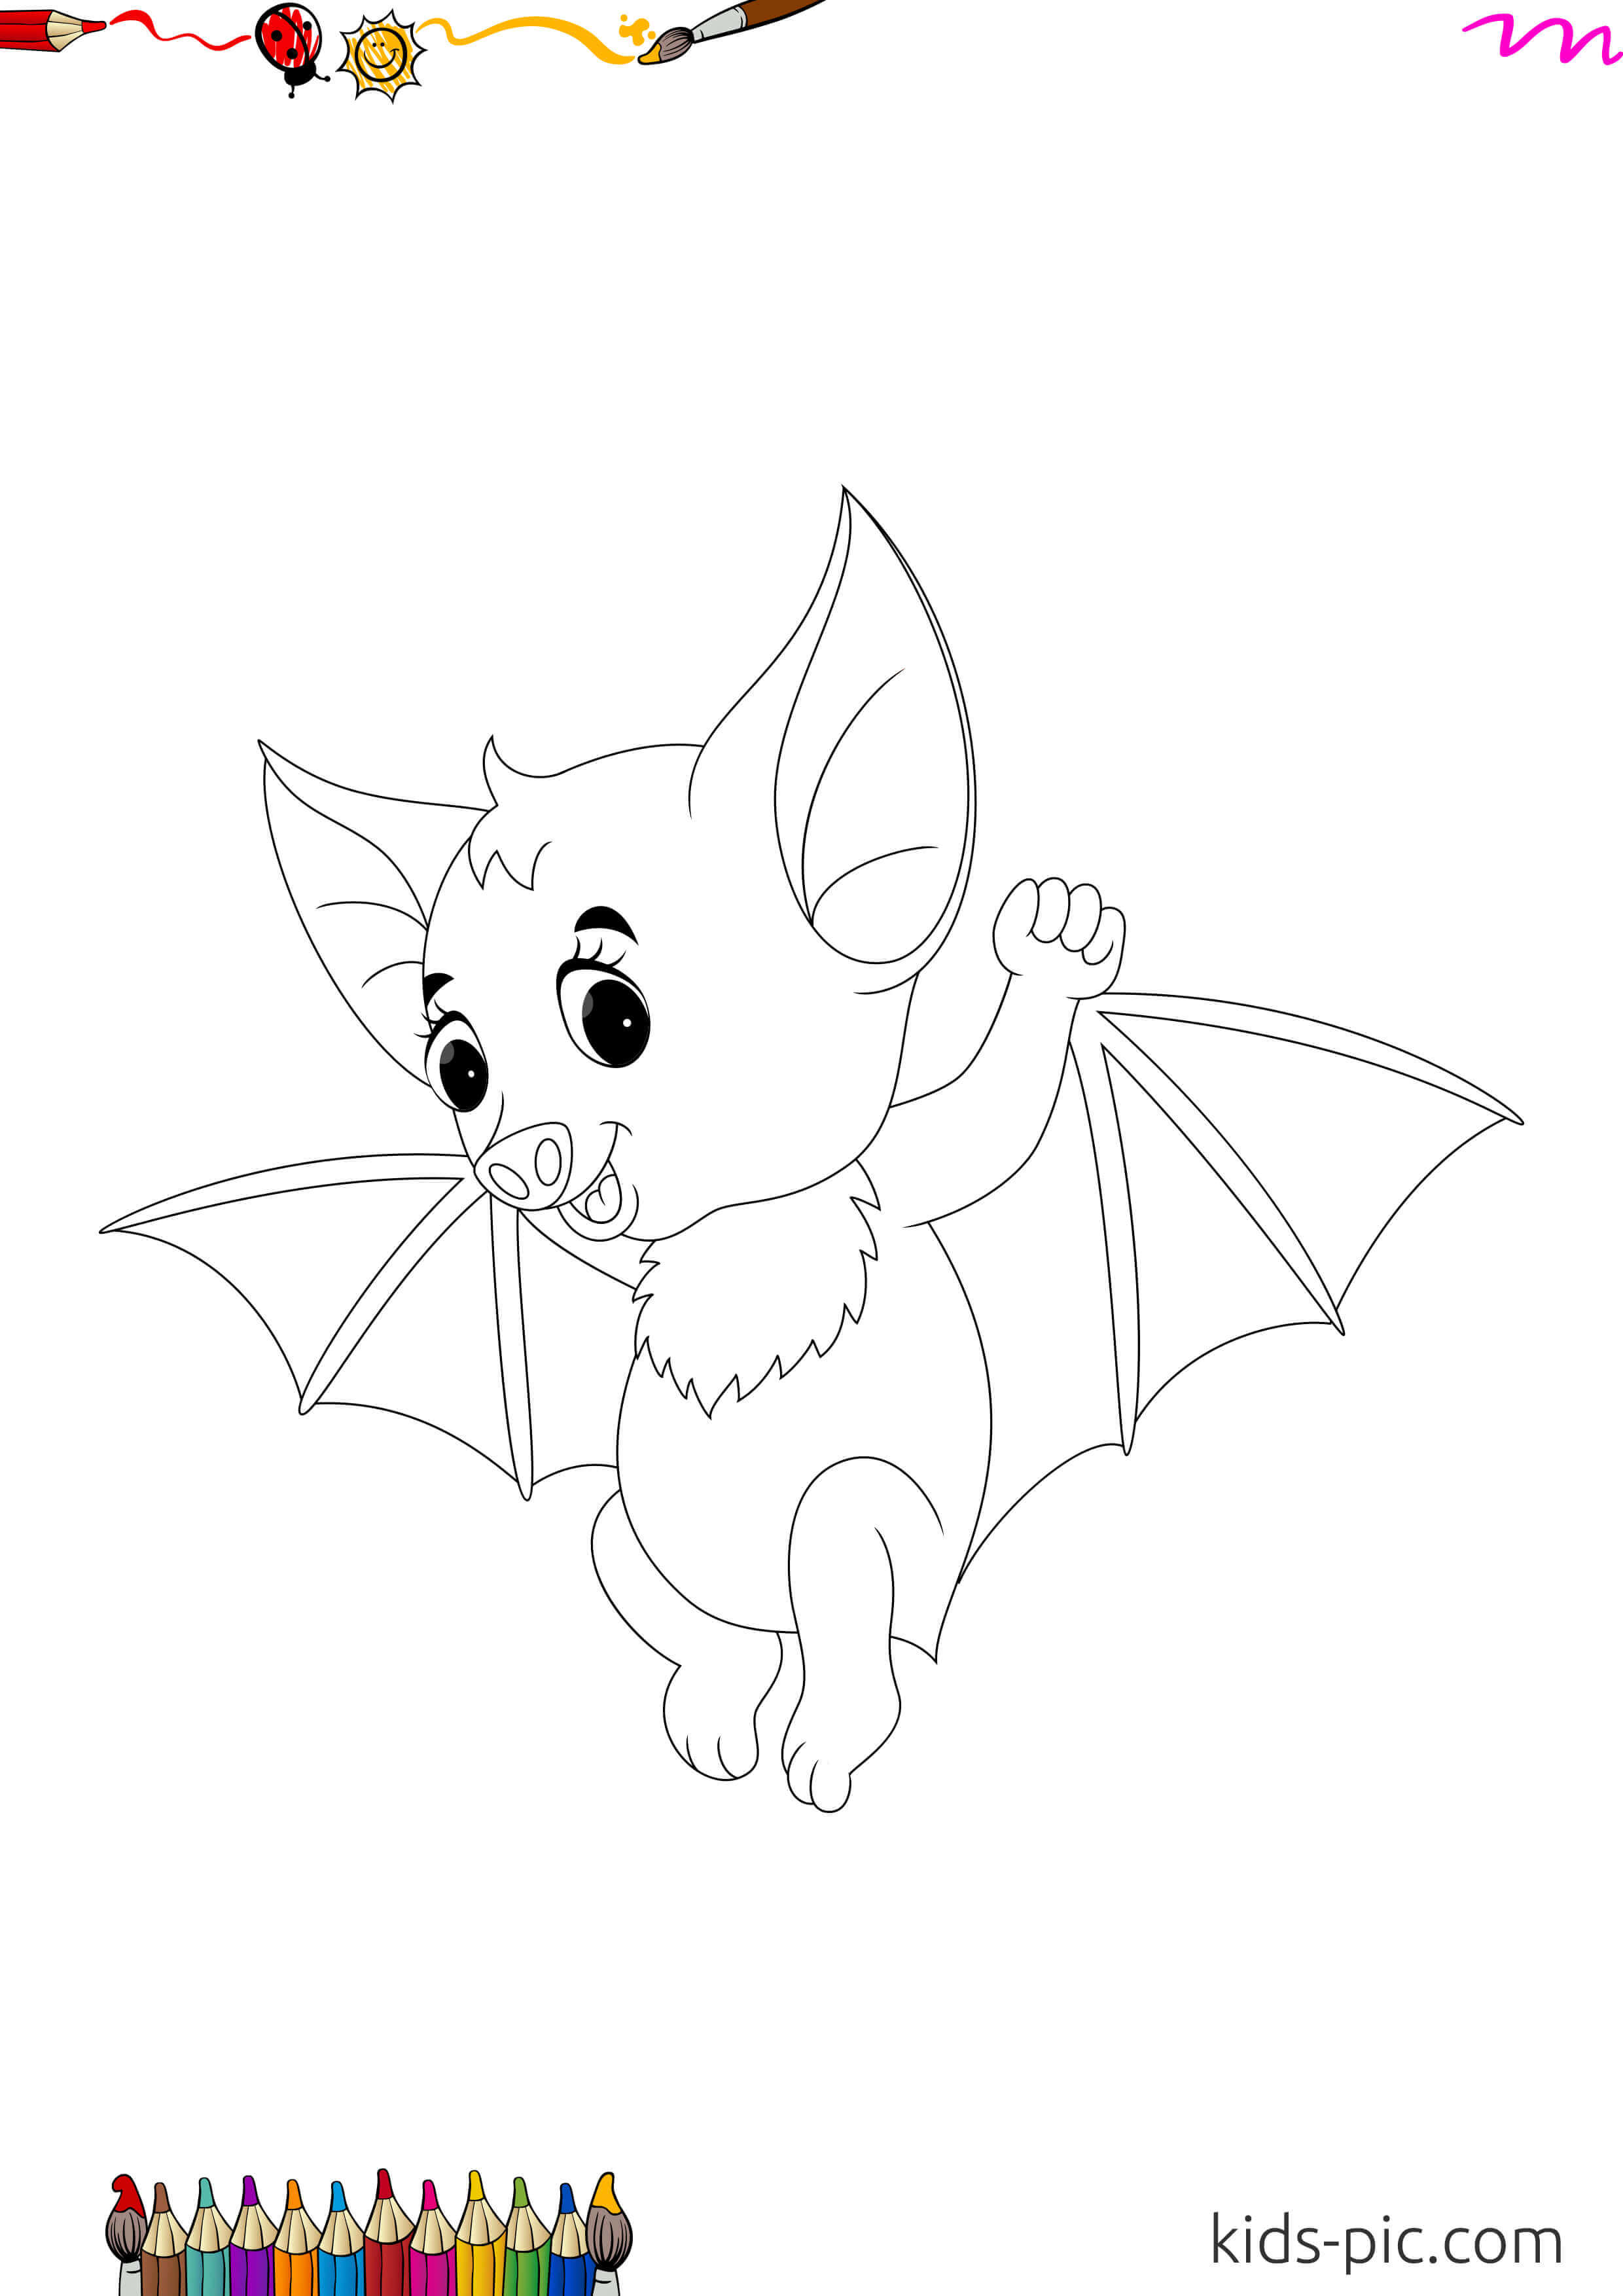 20 Free Halloween Bat Coloring Pages   Kids Pic.com